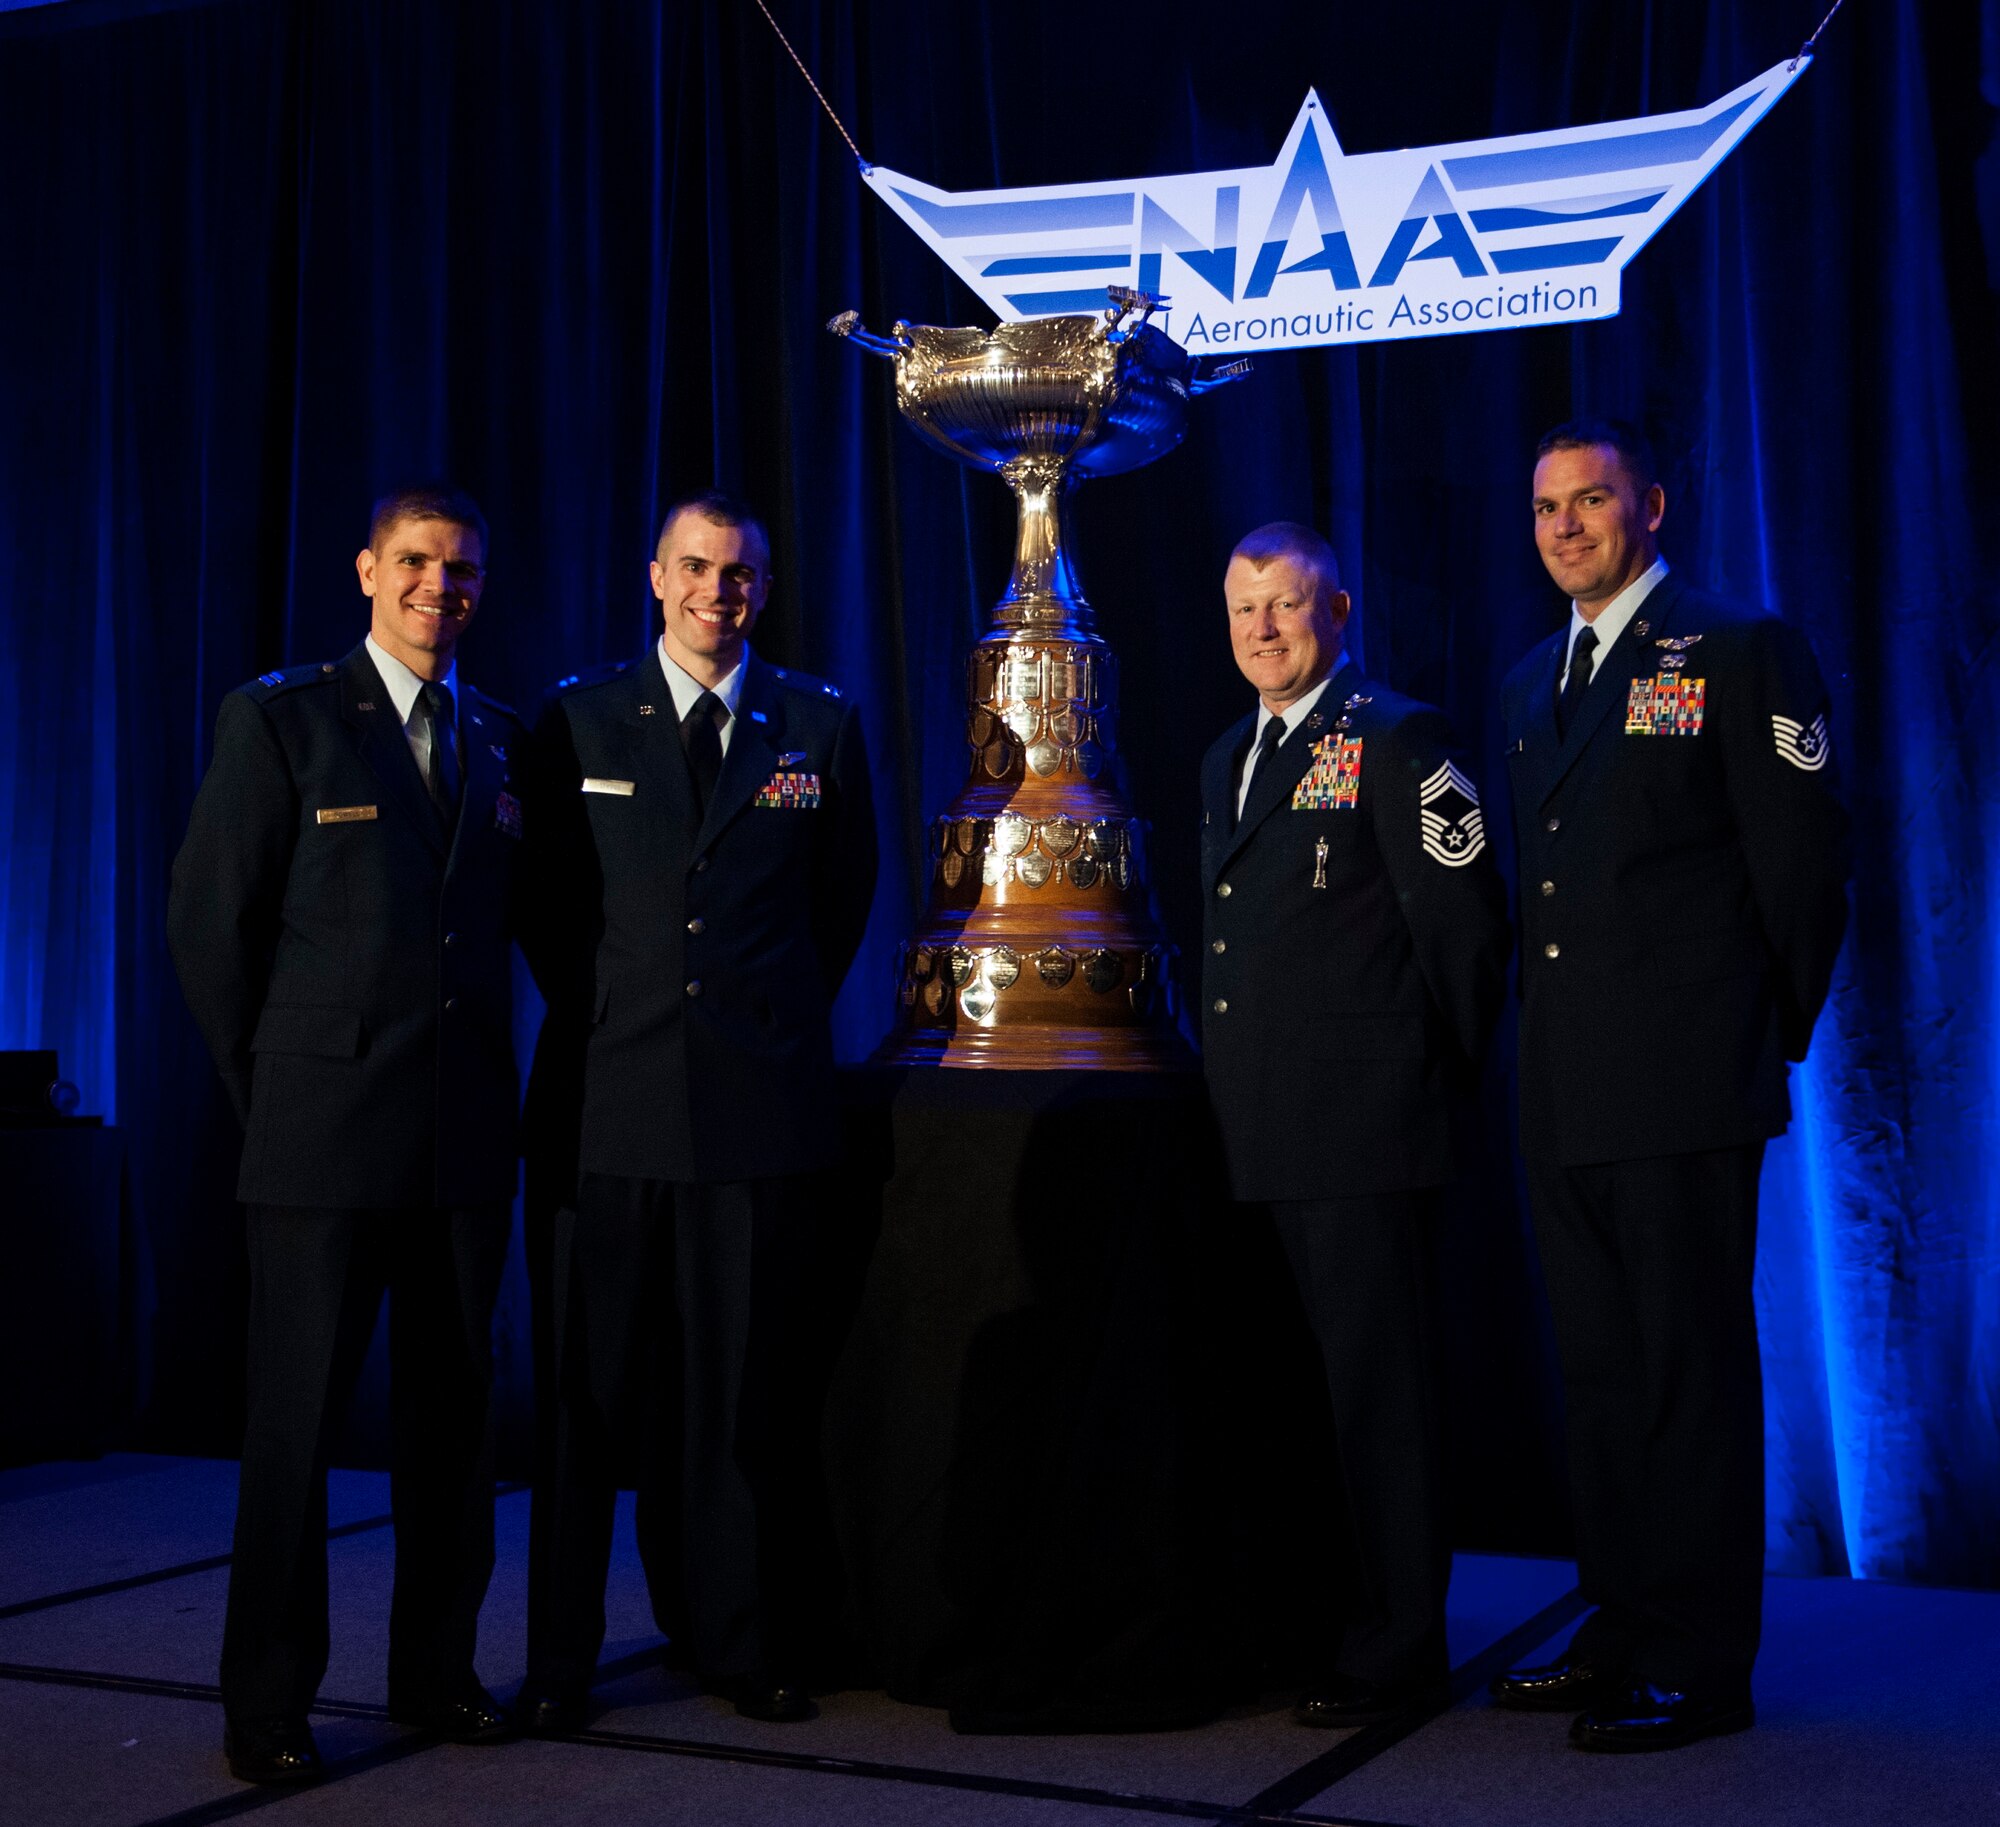 Members of Pedro 83 Flight, from left Capt. Vincent Powell, Capt. Brion Stroud, Chief Master Sgt. Norman Callahan, and Tech. Sgt. John Ballard, accept the Mackay Trophy on behalf of Pedro 83 Flight during a ceremony, in Arlington, Va., Nov. 12, 2013. The trophy is awarded for the "most meritorious flight of the year" by an Air Force person, persons or organization.(U.S. Air Force photo by Staff Sgt. Carlin Leslie)